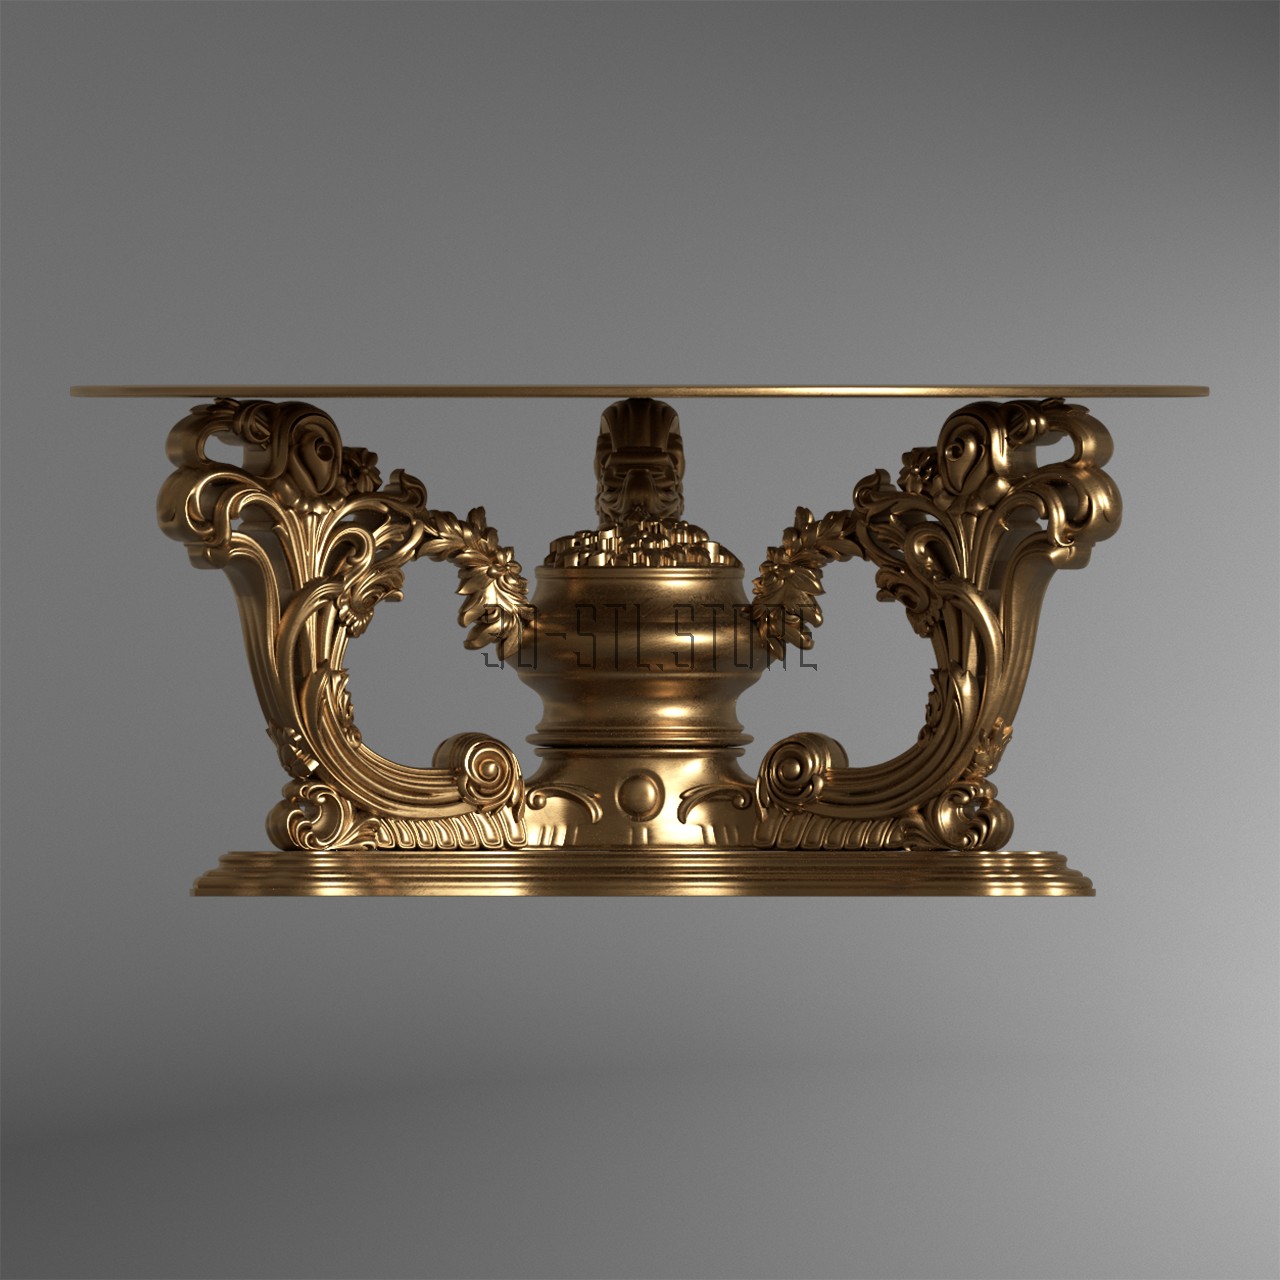 Table with carved legs, 3d models (stl)